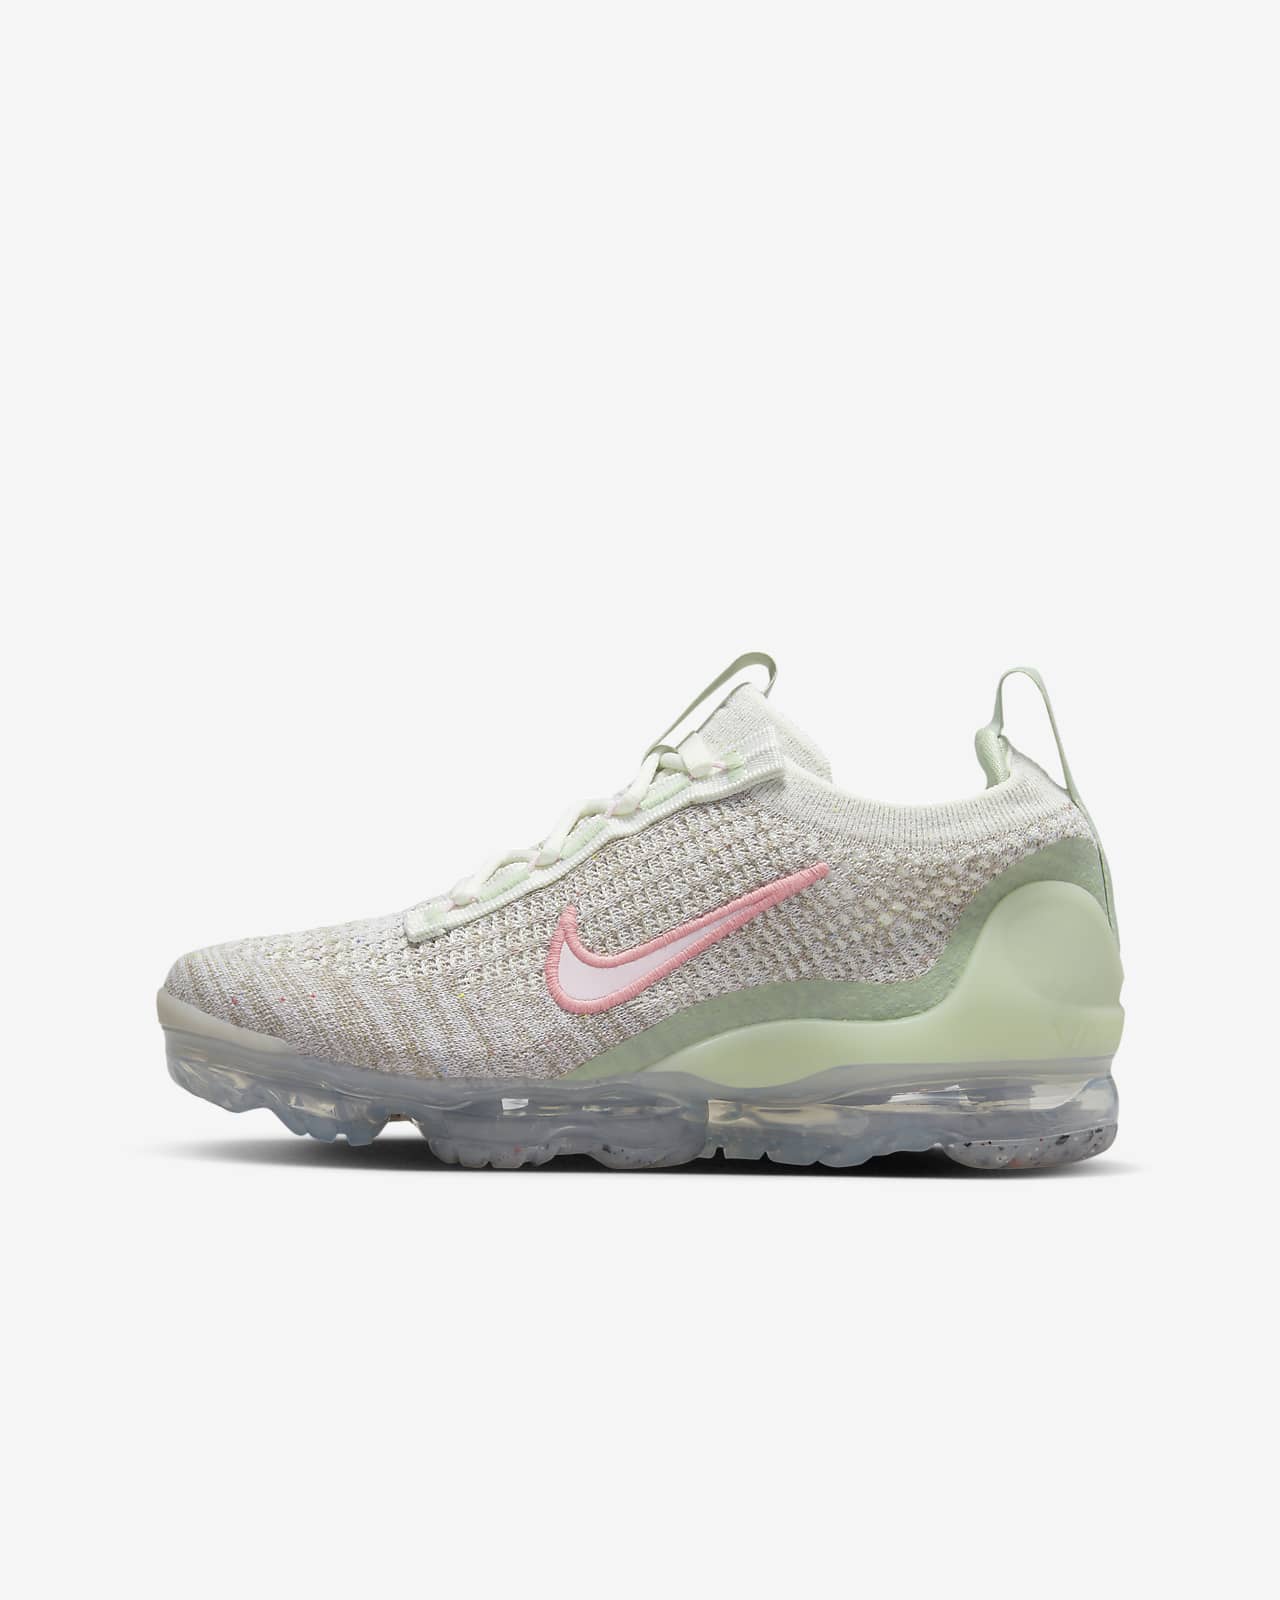 vapormax shoes for kids